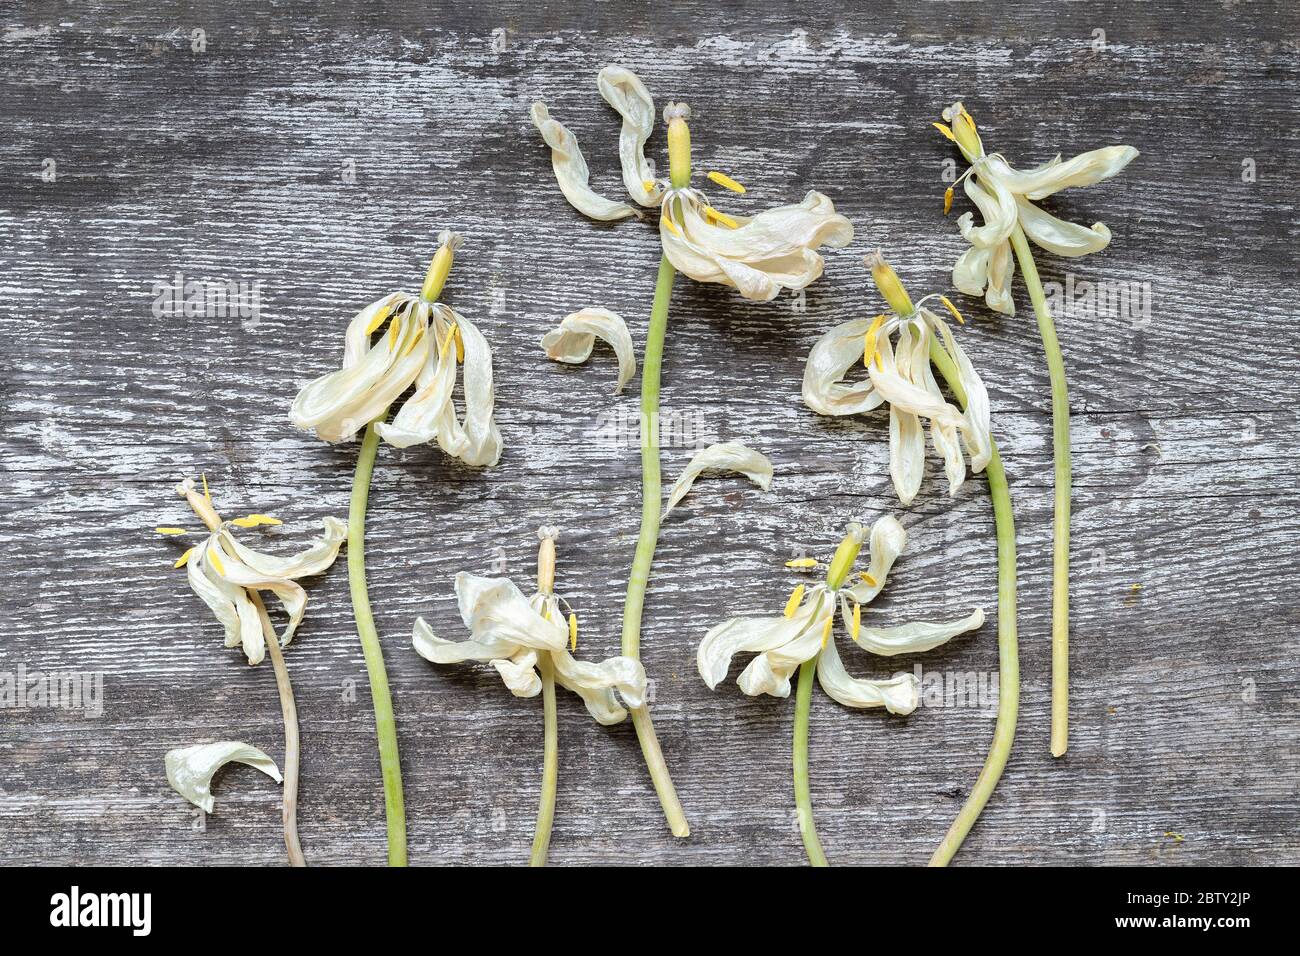 Lots of amazing dry withered white tulips on the old worn-out scratched wooden bench surface. View from above, close up Stock Photo